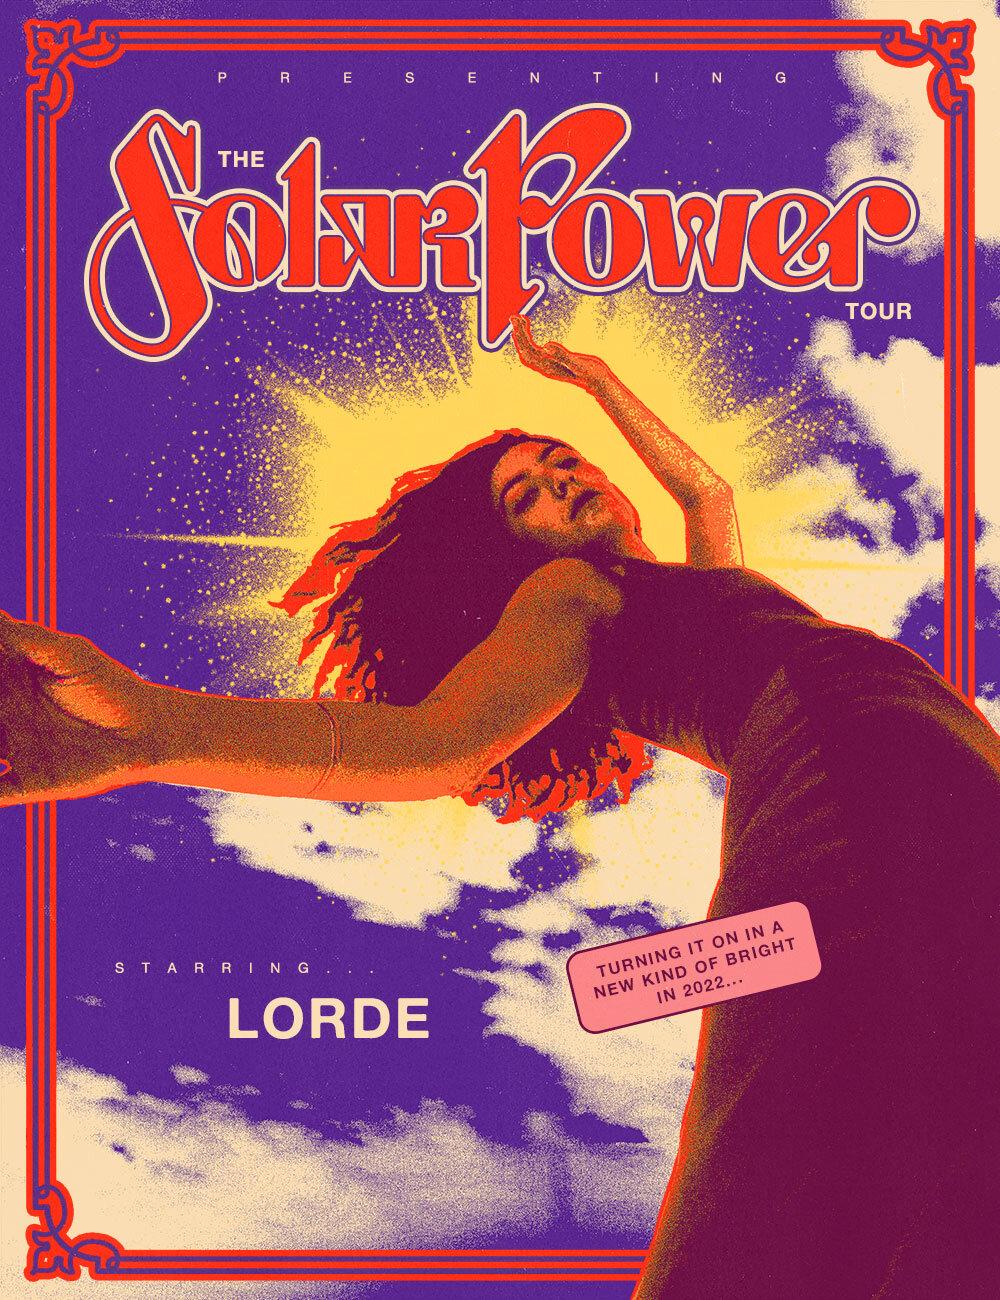 Lorde sways underneath the beaming sun in her psychedelic-styled tour poster. On June 21, Lorde announced her third tour, "The Solar Power Tour," which will begin February 2022 in Christchurch, New Zealand. Photos courtesy of lorde.co.nz